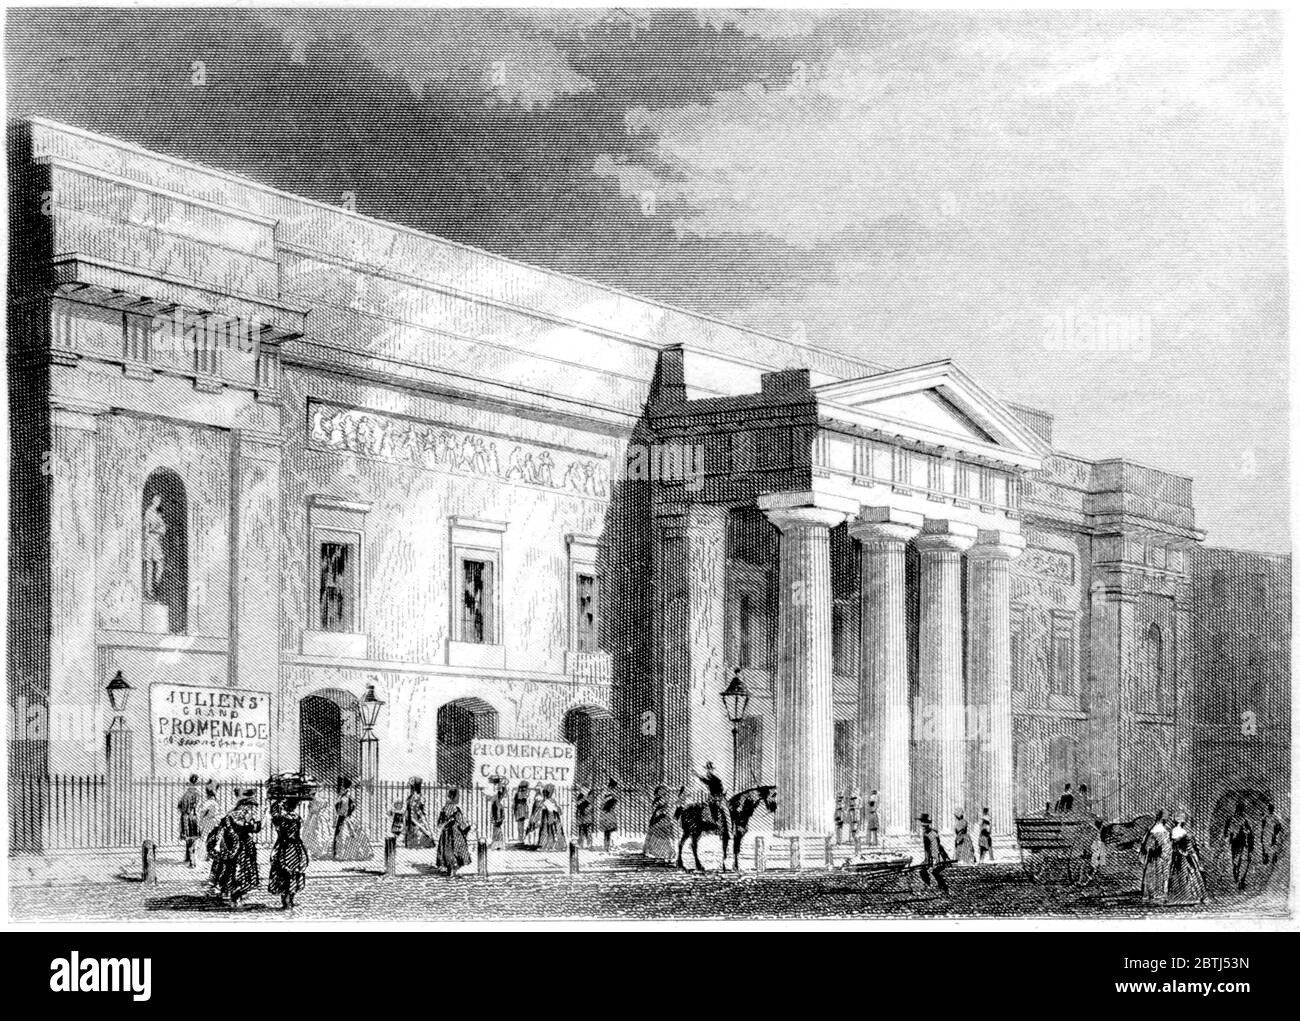 Engraving of Covent Garden Theatre London scanned at high resolution from a book printed in 1851. This image is believed to be free of all copyright. Stock Photo